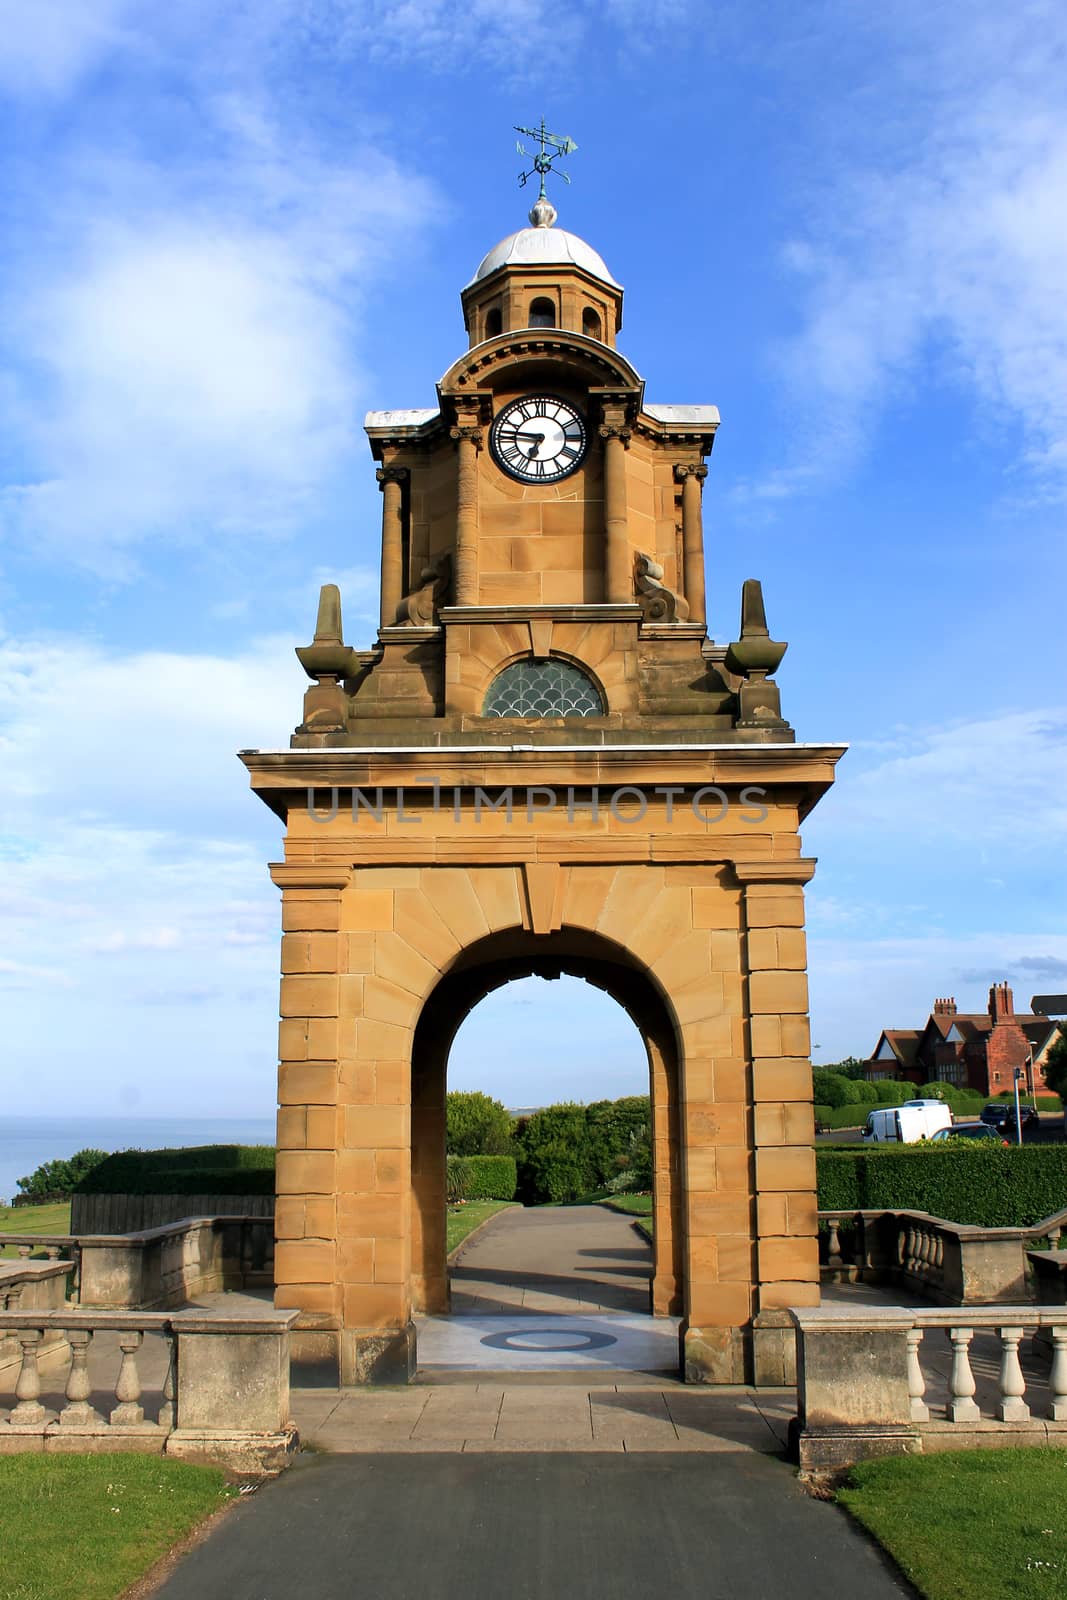 South Cliff historic clock tower in Scarborough, North Yorkshire, England.